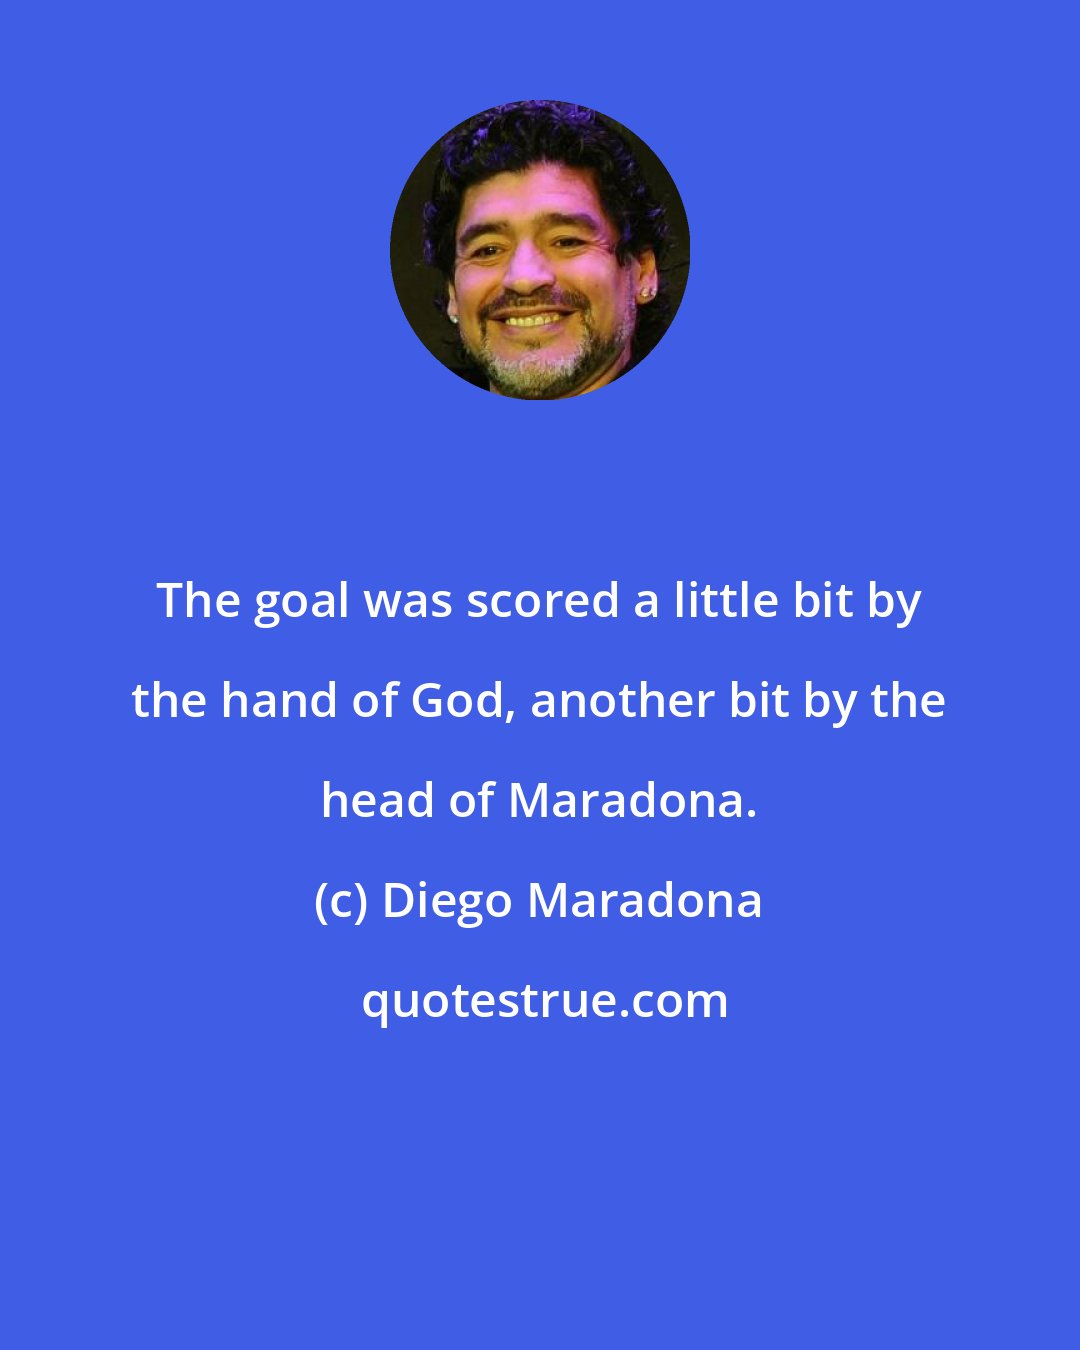 Diego Maradona: The goal was scored a little bit by the hand of God, another bit by the head of Maradona.